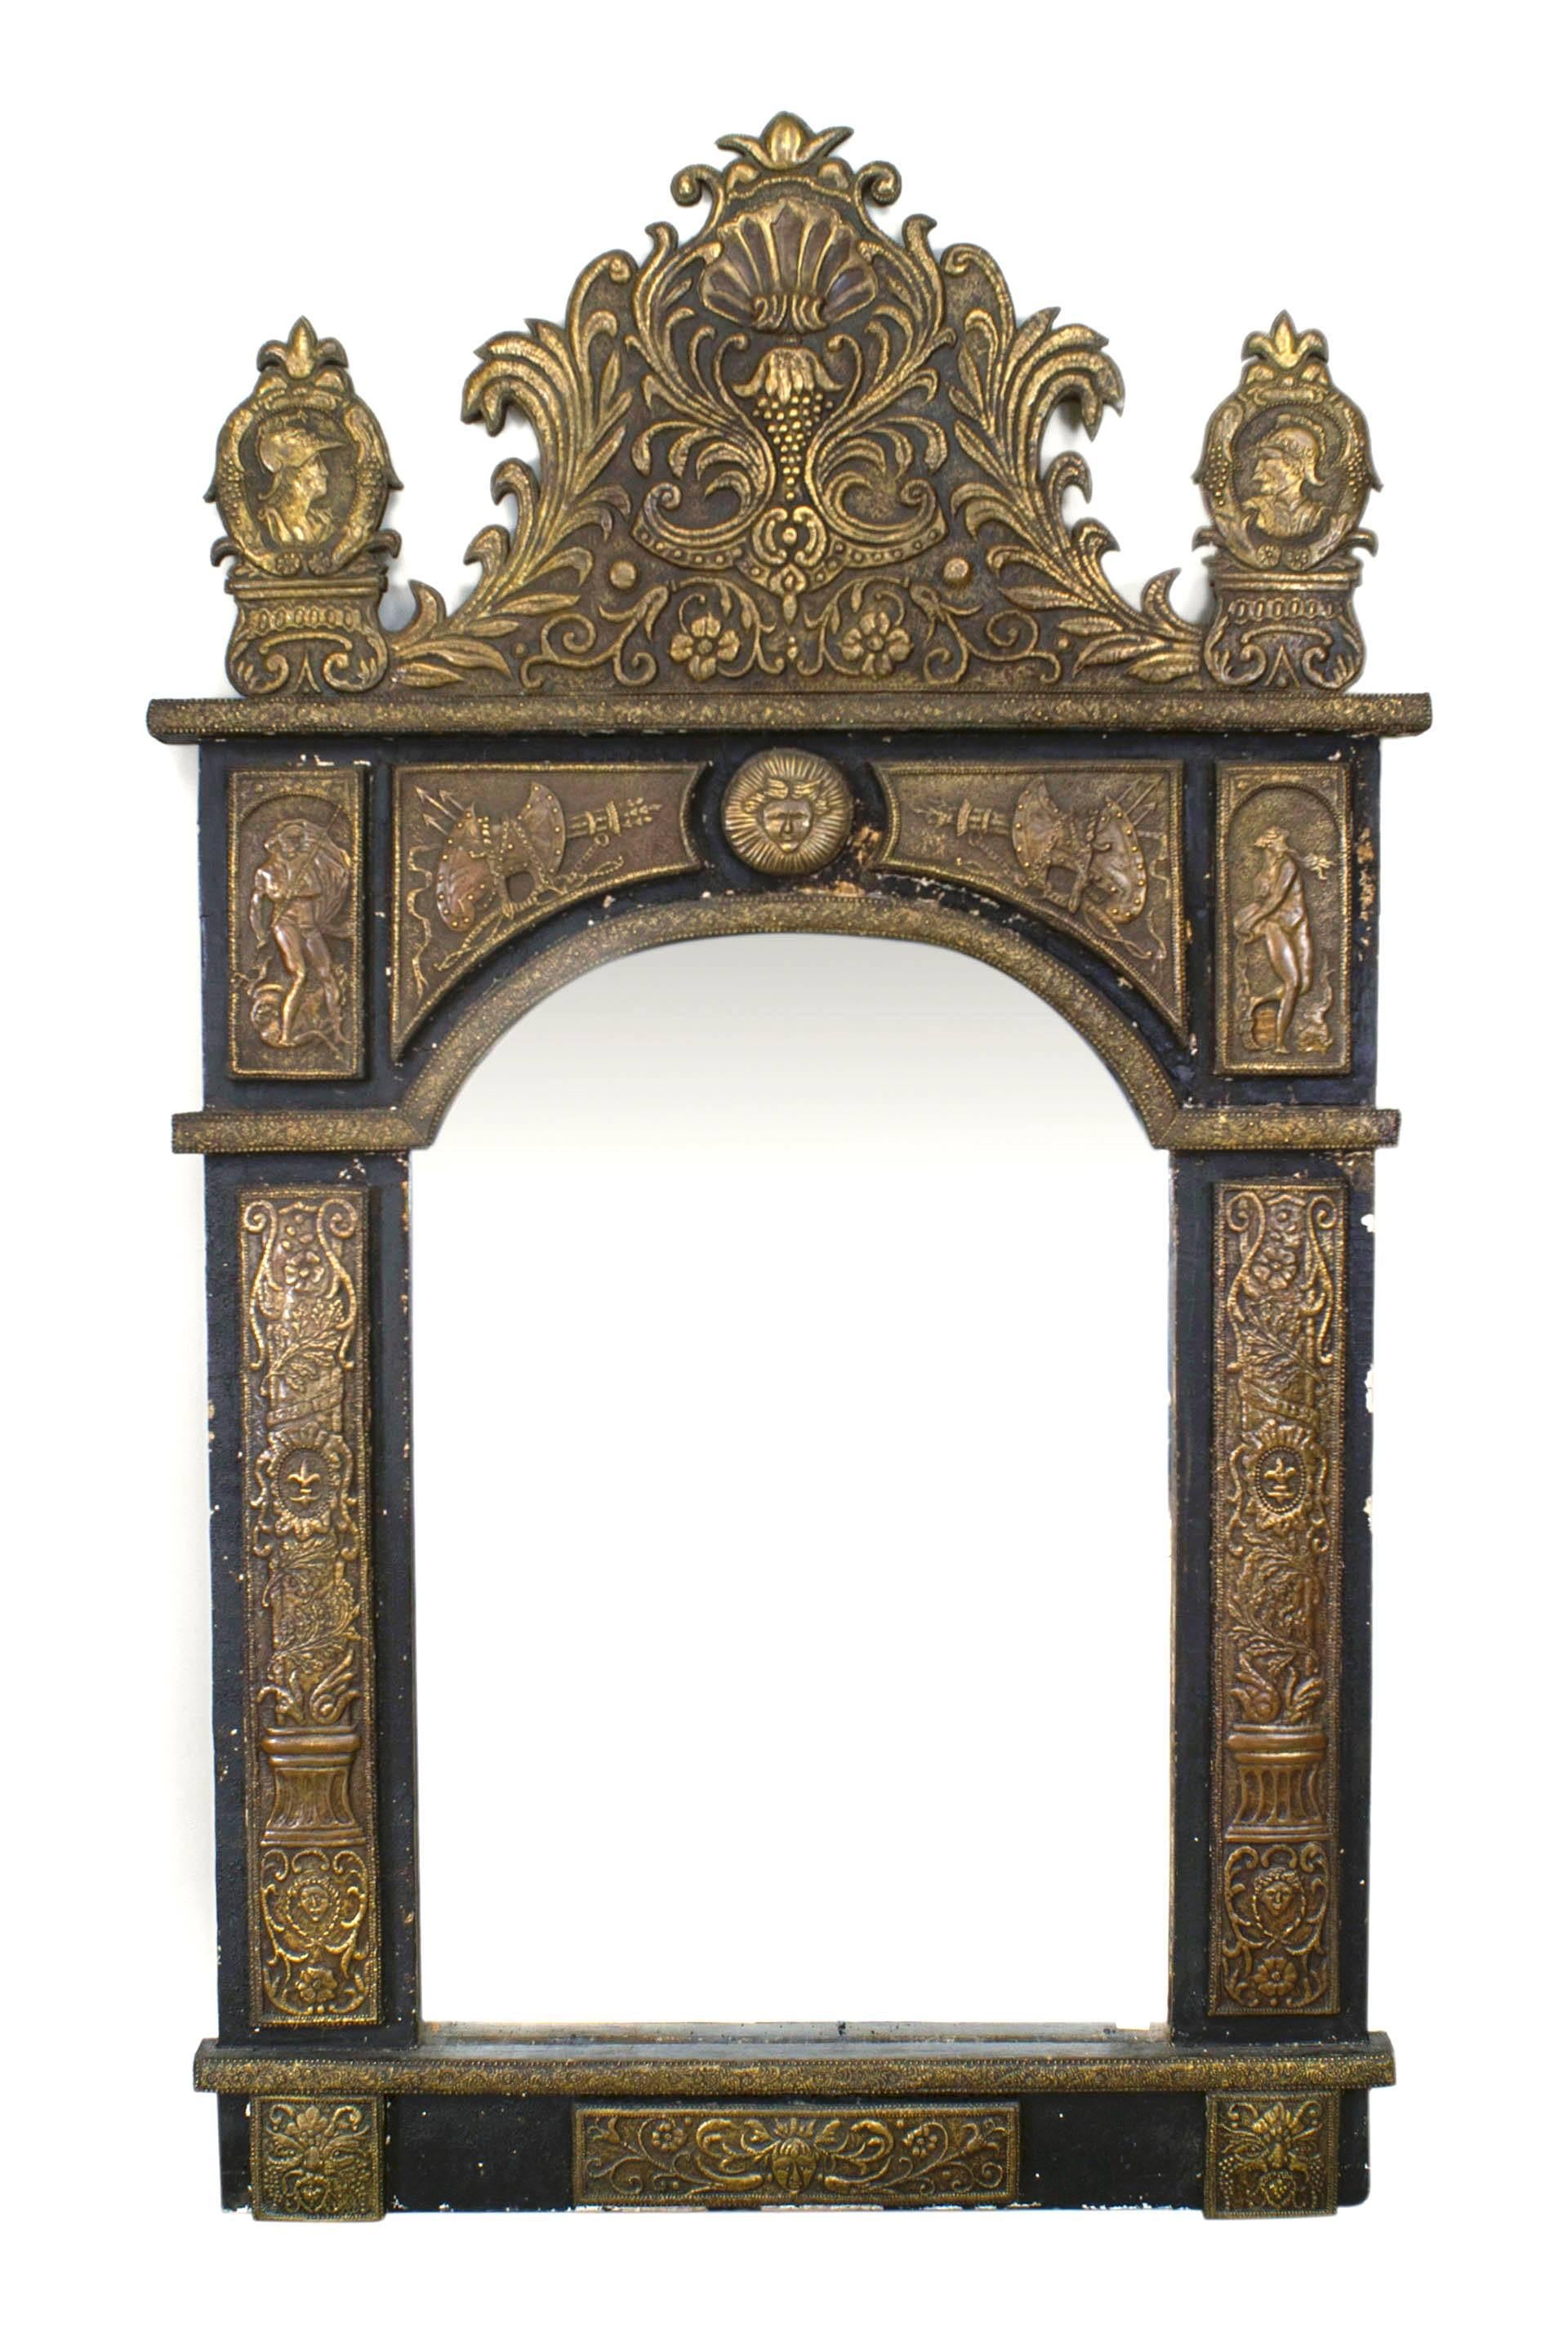 French Renaissance-style (19th Century) brass embossed repose wall mirror in an ebonized frame with Renaissance-style figures and motifs, an arch form mirror, and a pediment top.
